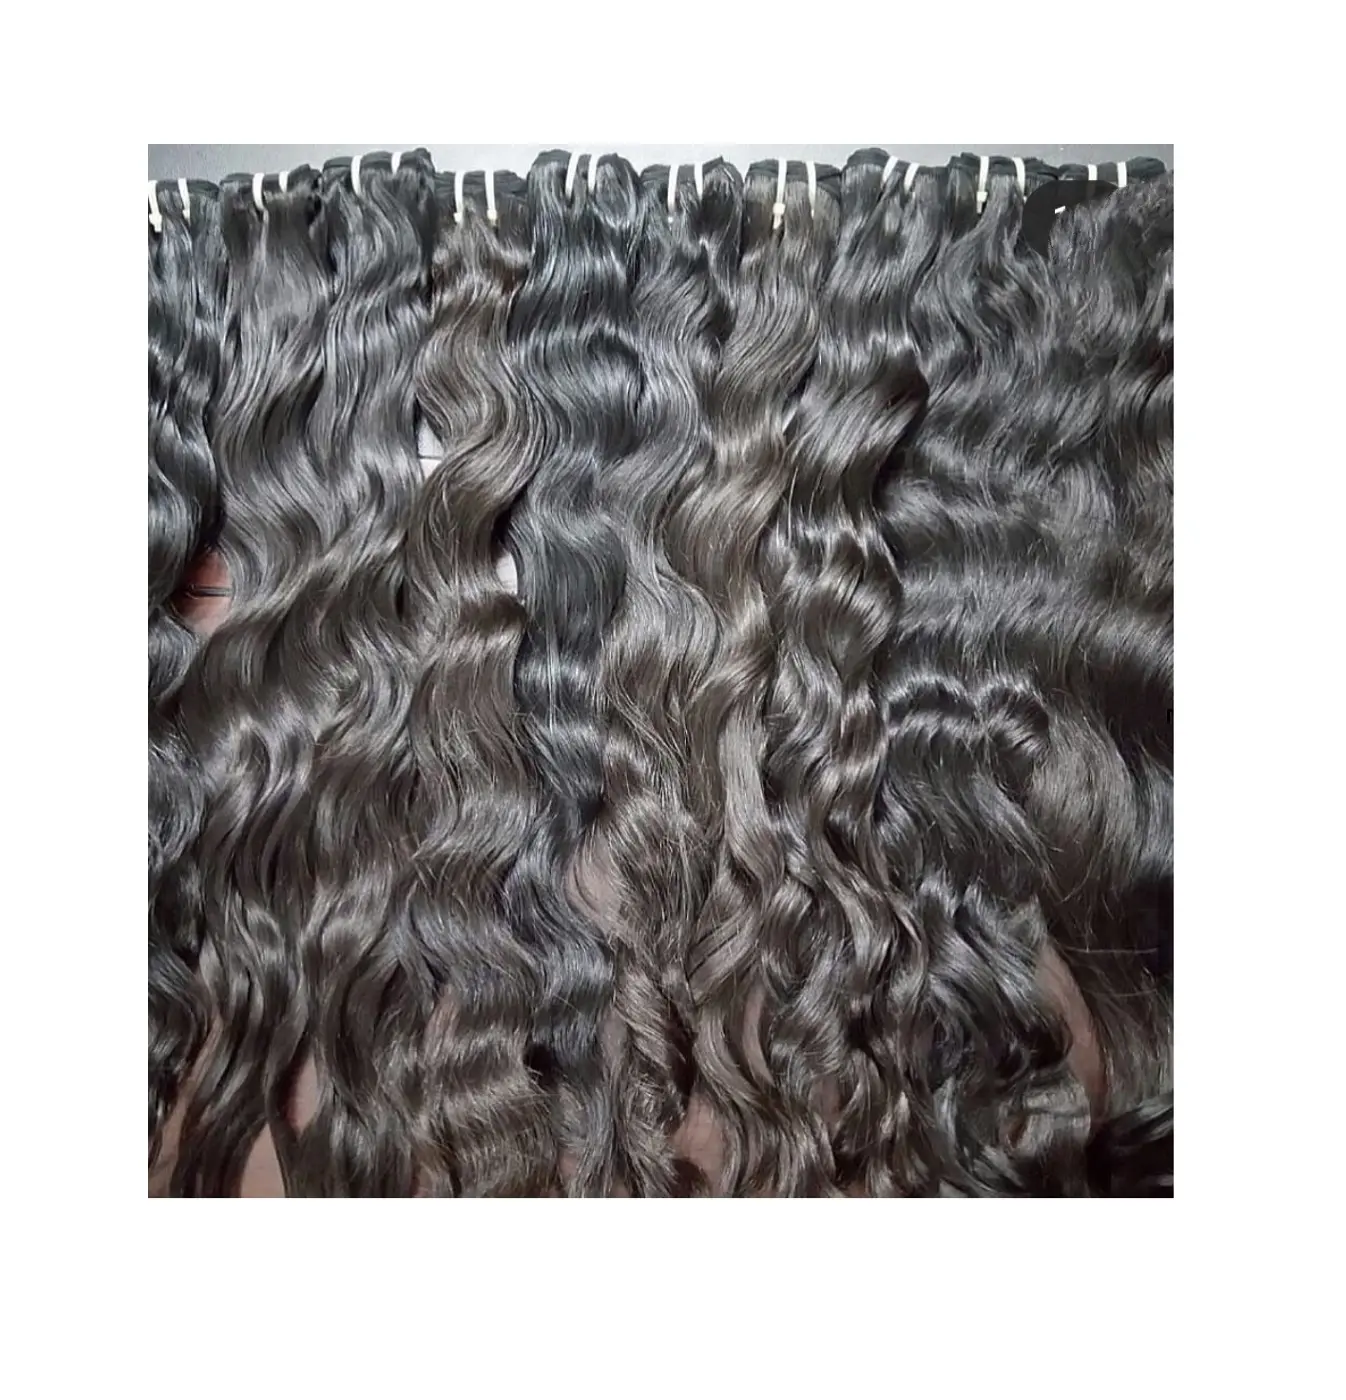 Raw Indian hair from south Indian temple at best price Ship Through DHL And Fedex